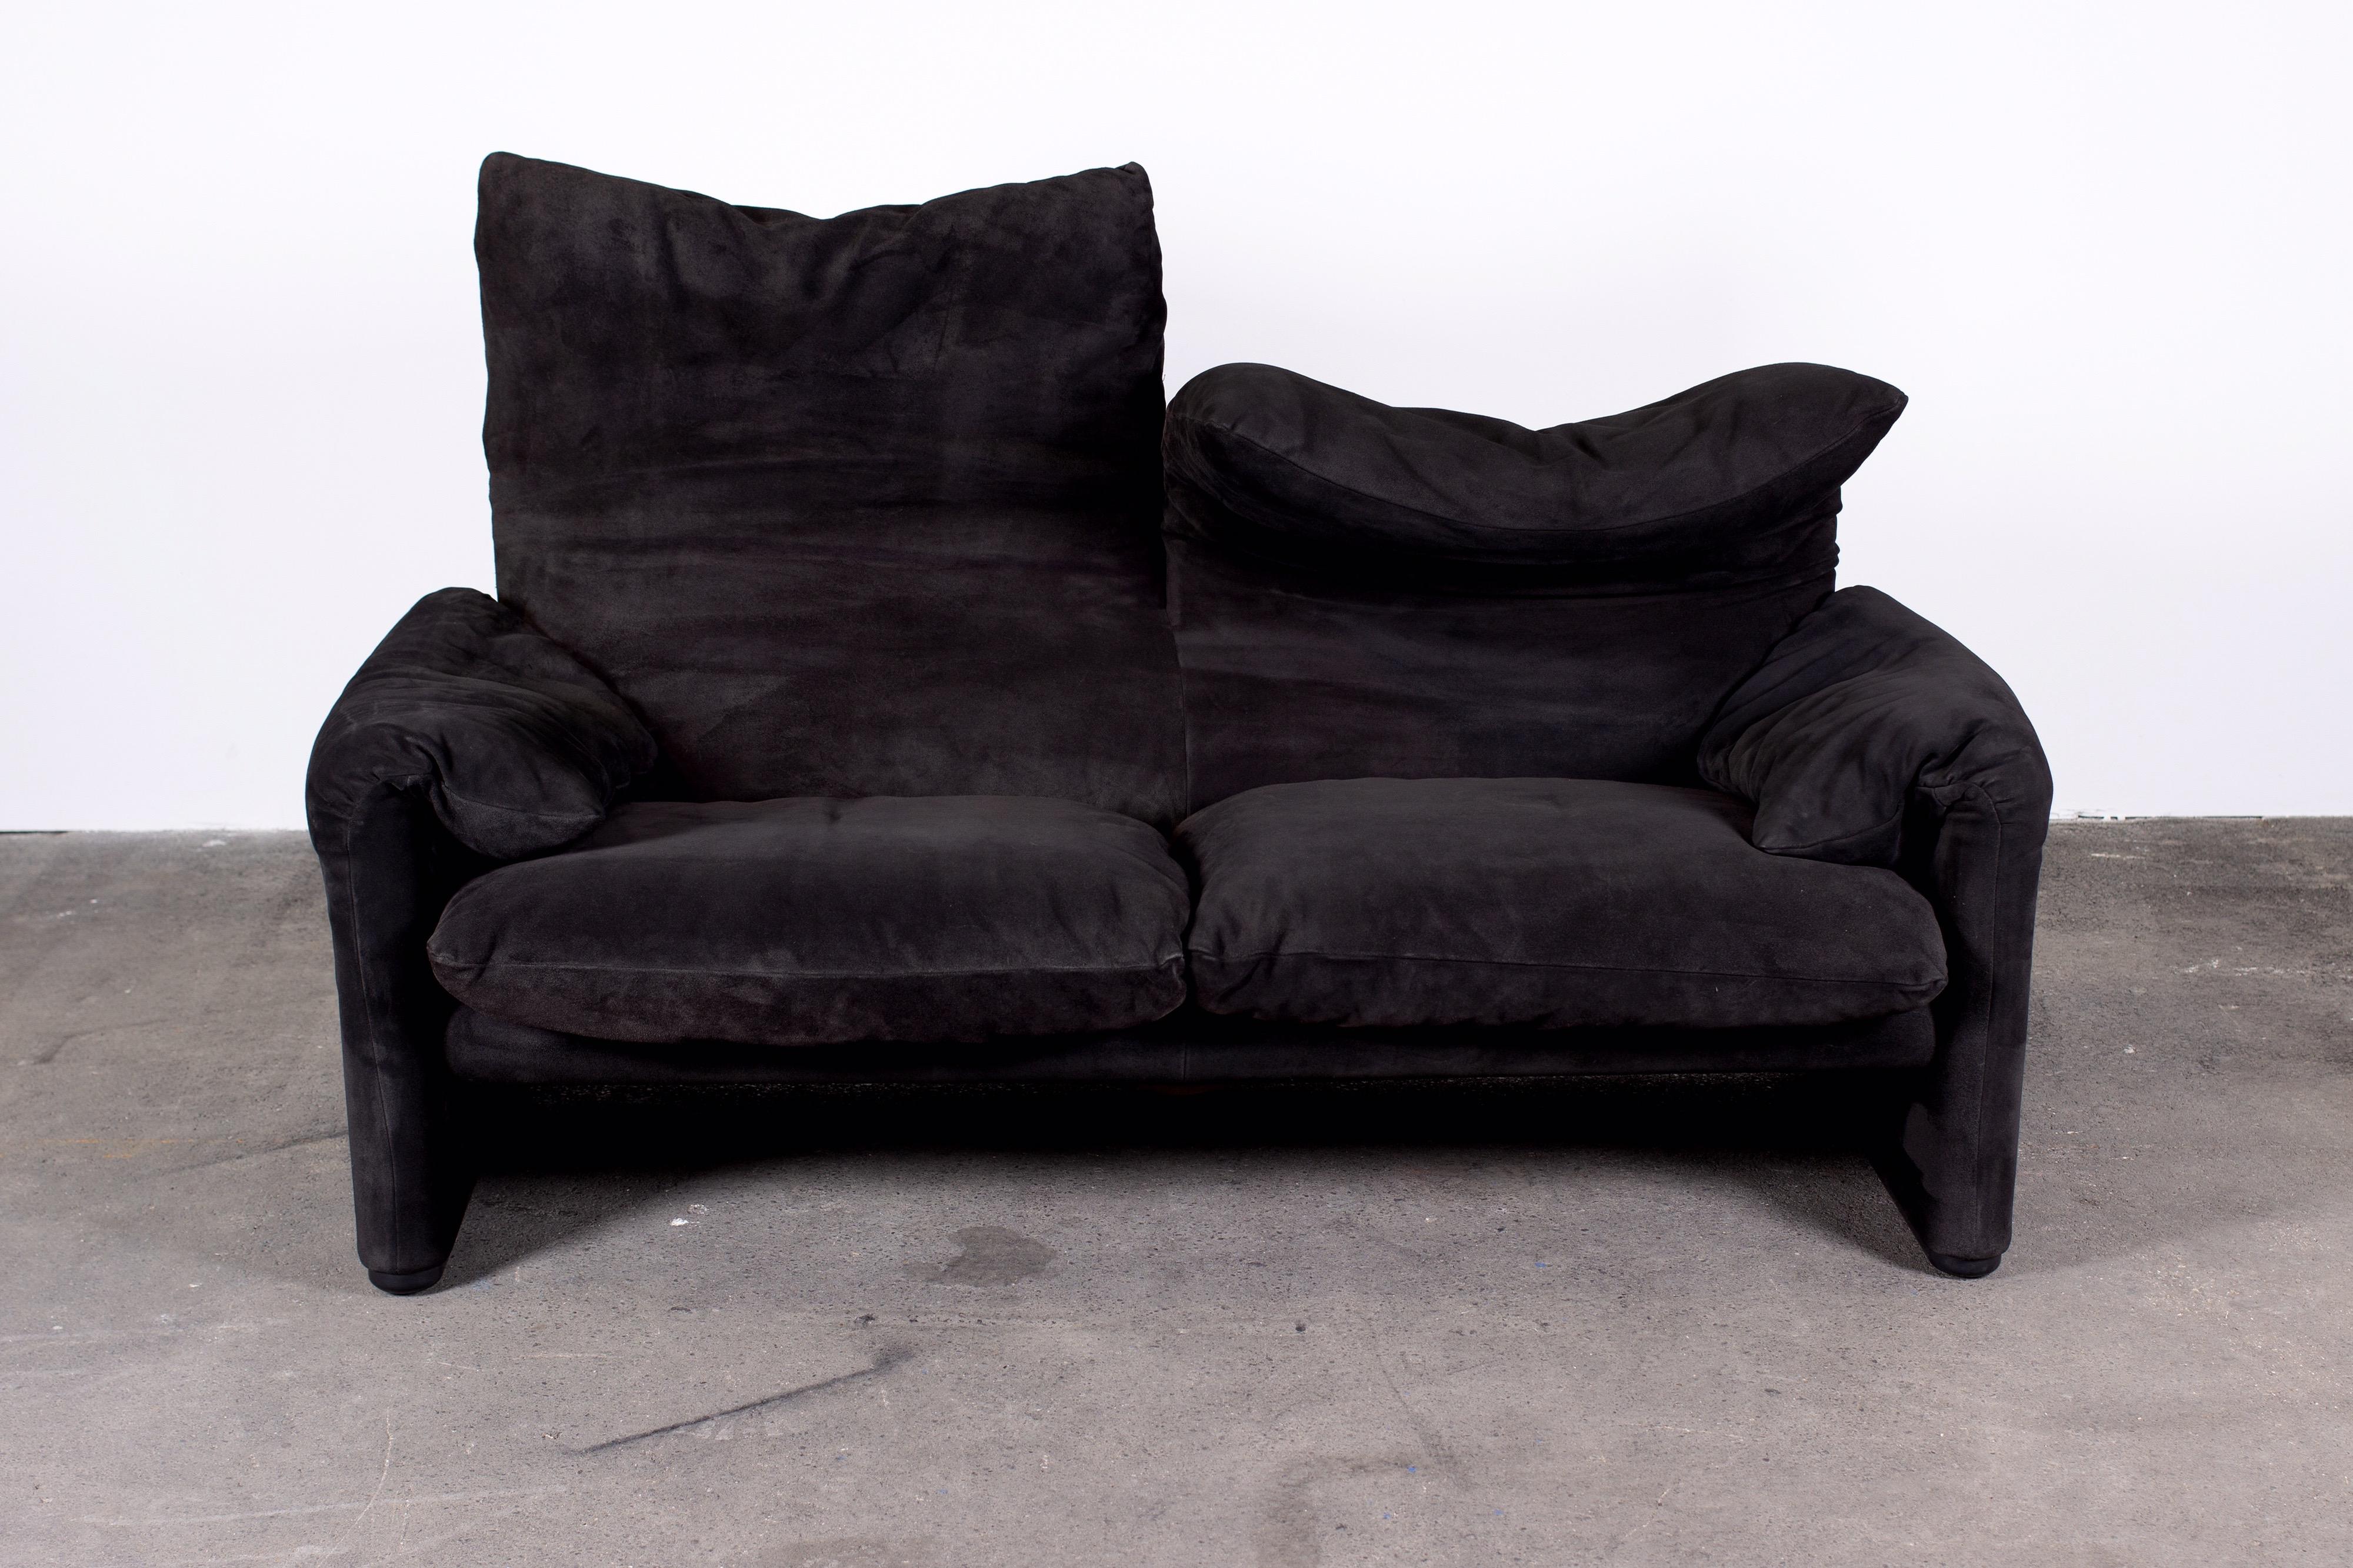 Pair of Black Suede 2-Seater Maralunga Sofas by Vico Magistretti for Cassina 3